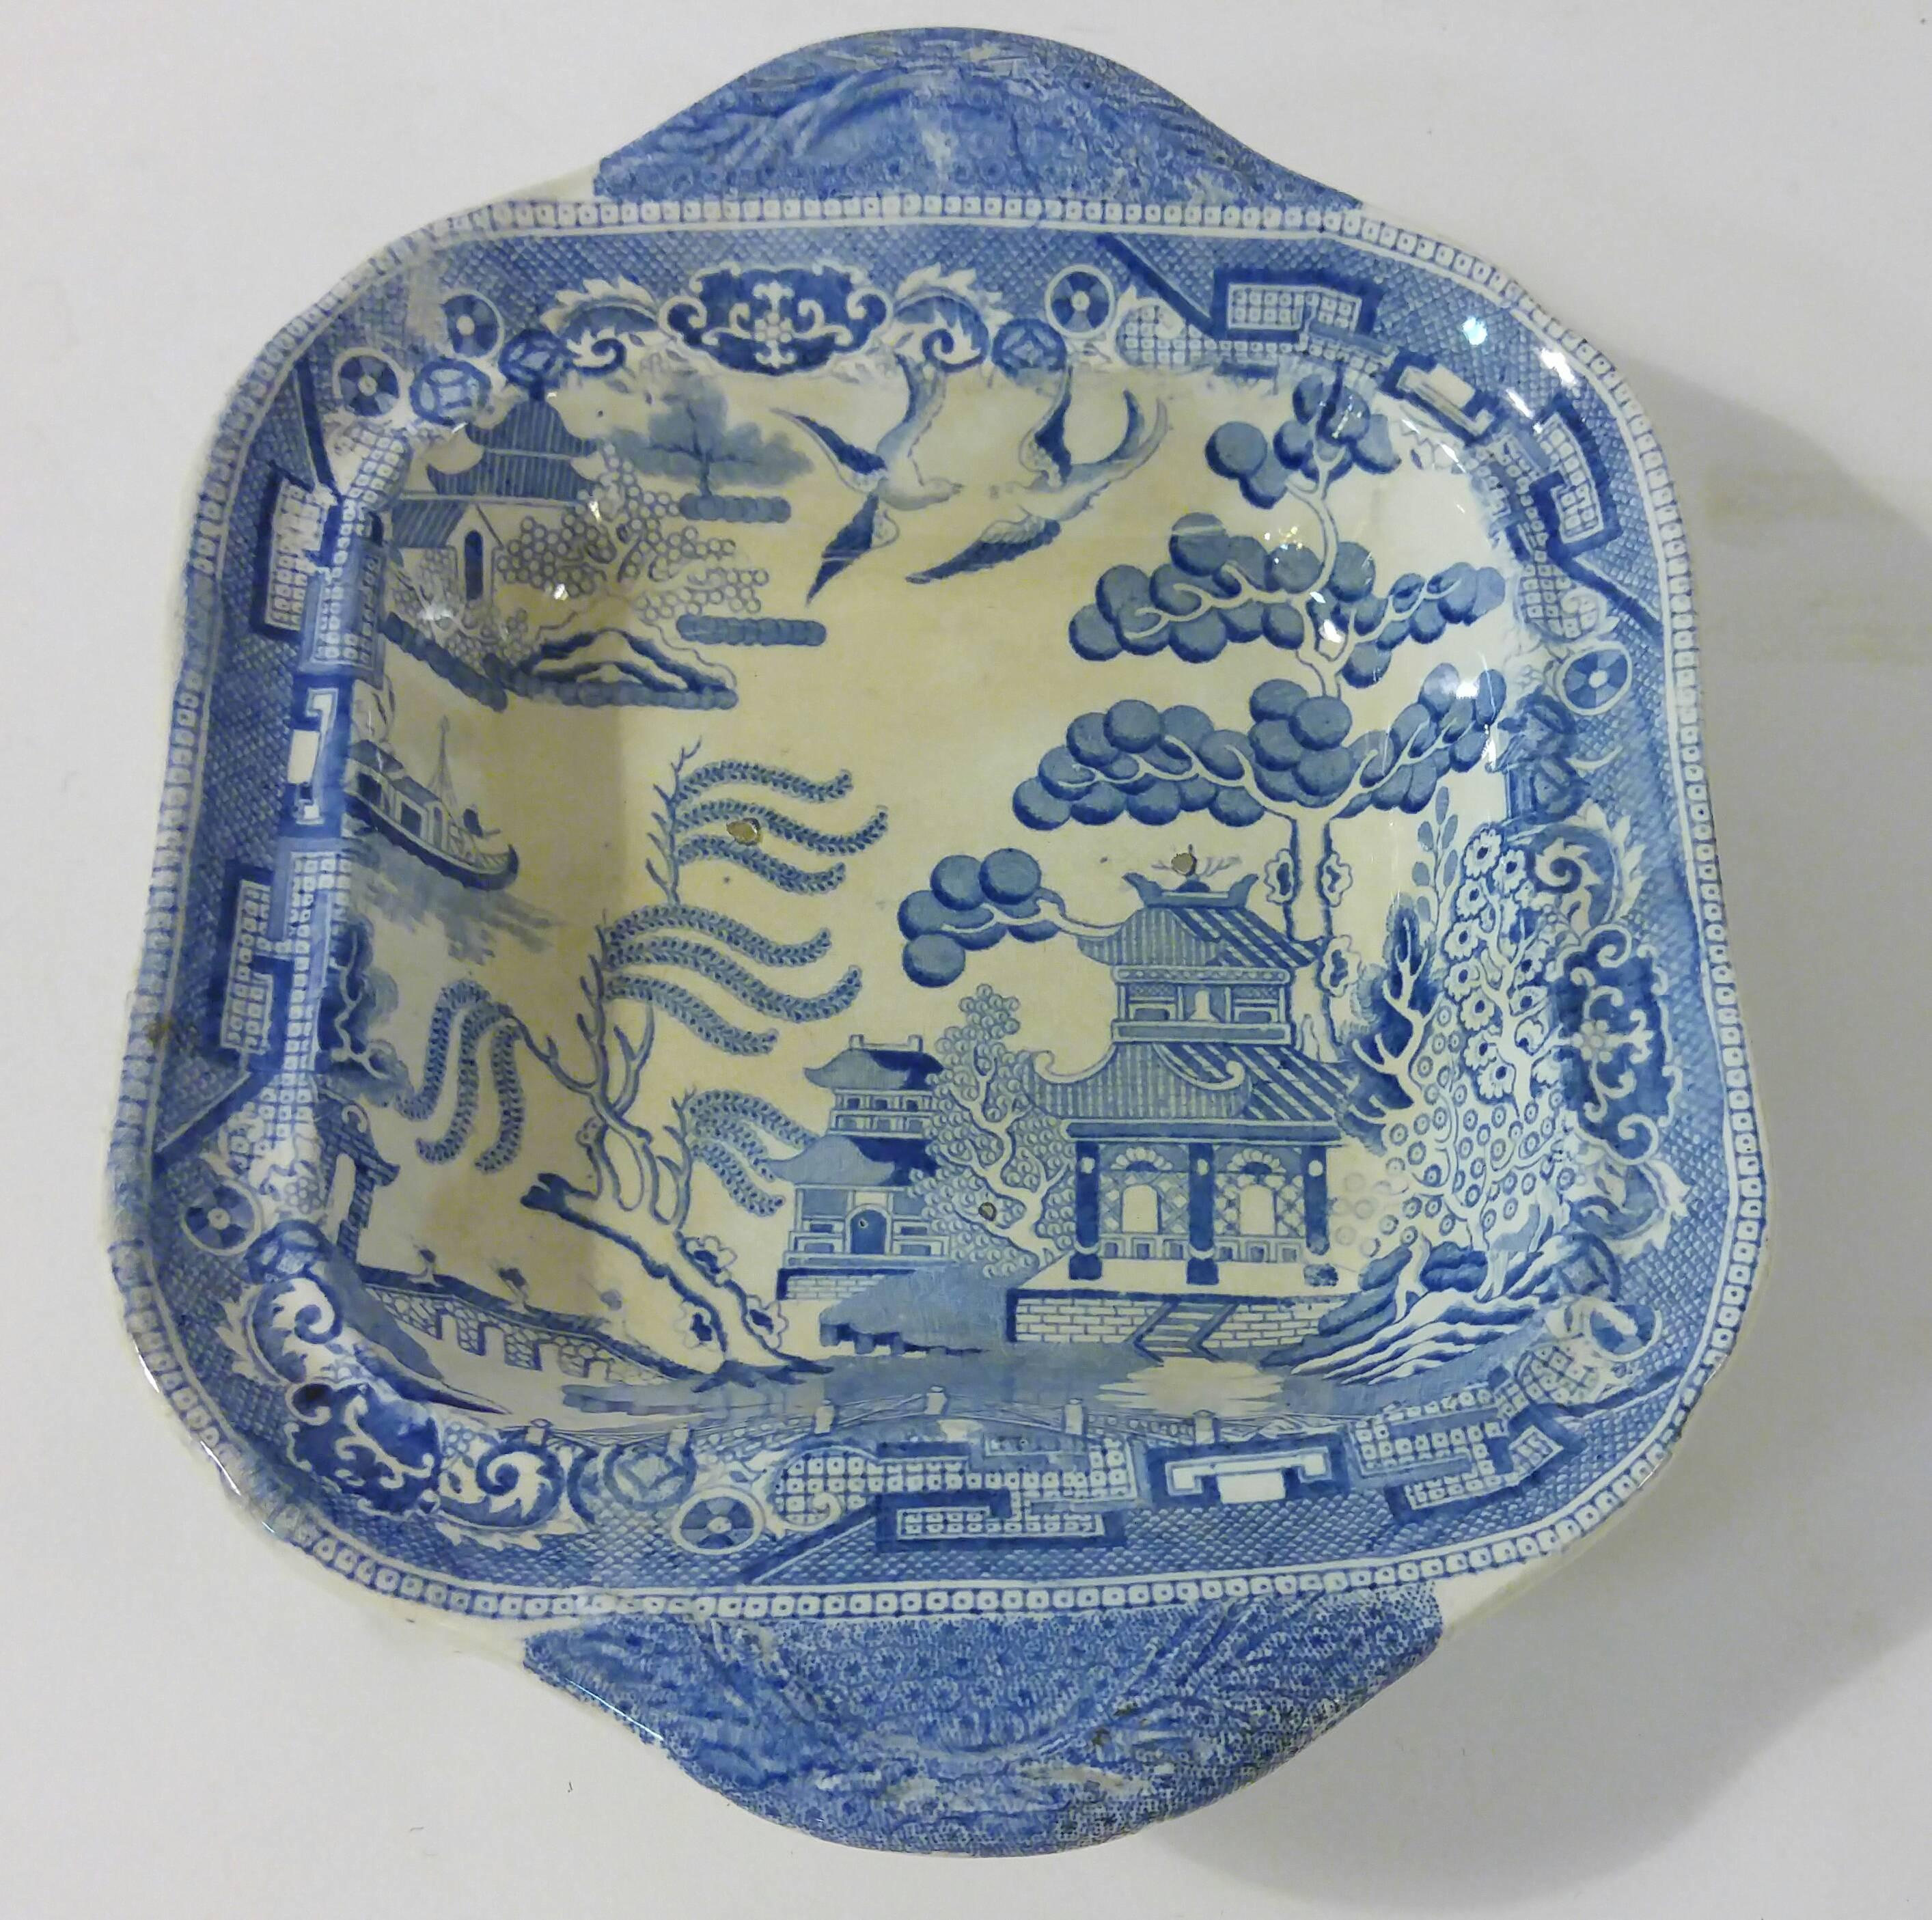 19th century English transfer-ware lidded vegetable dish in the blue willow pattern. The bowl features handles on either side with a deep lid with decorative finial knob.